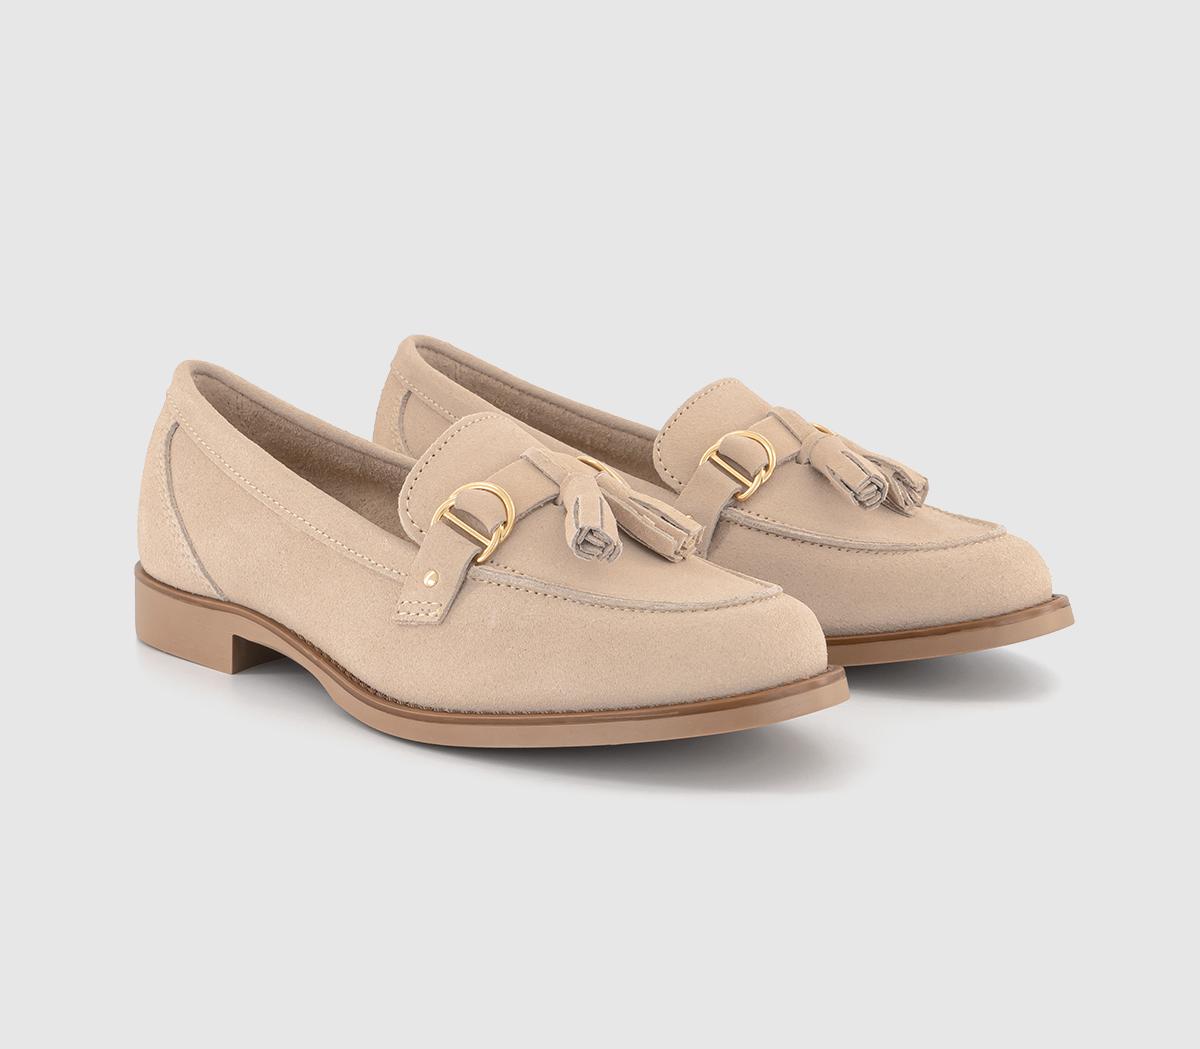 OFFICE Womens Feels Leather Trim Tassel Loafers Blush Suede Natural, 7